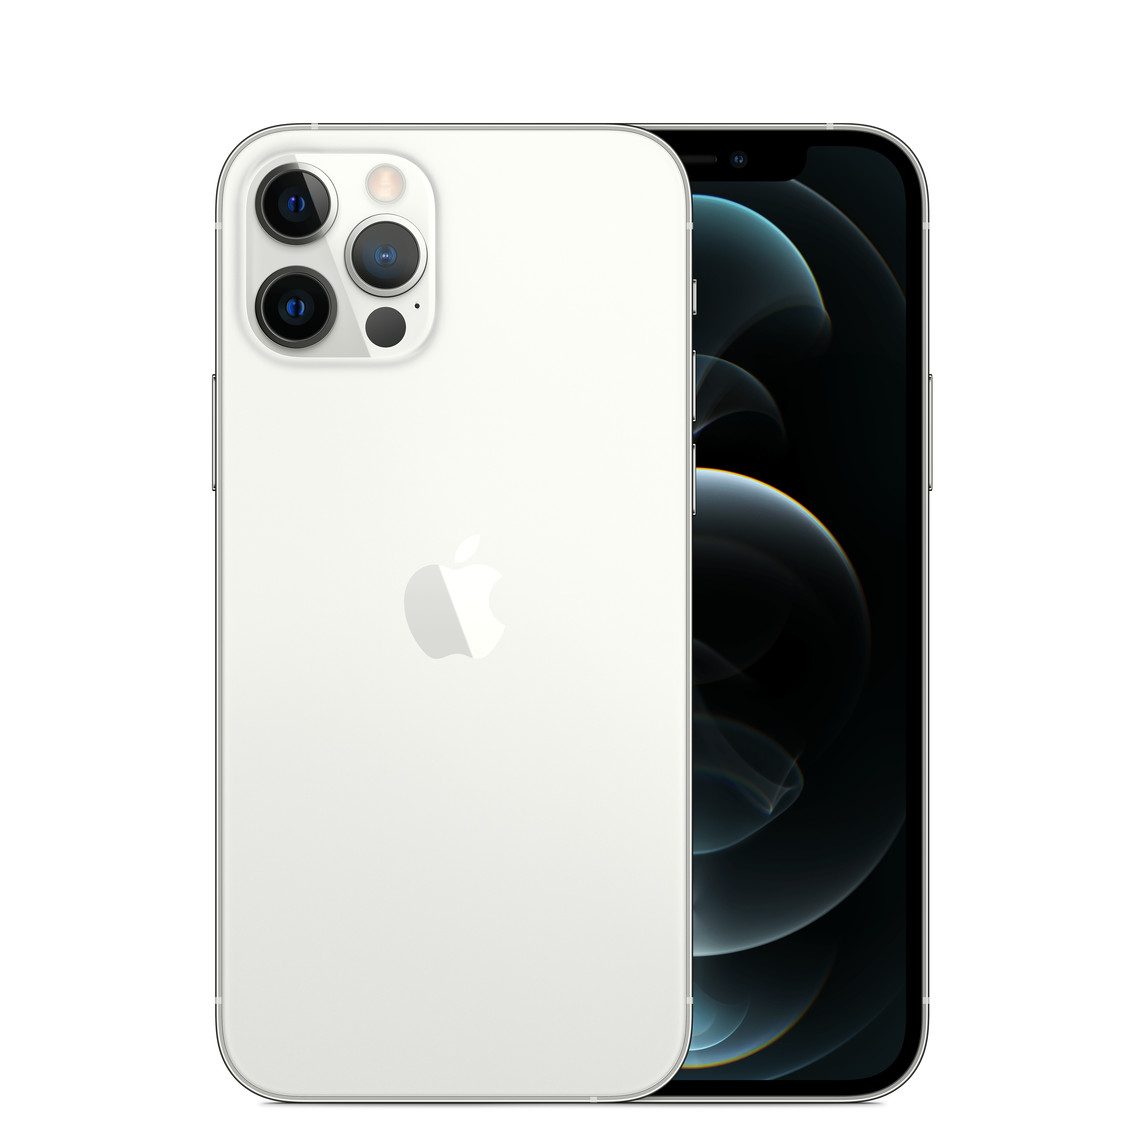 Silver iPhone 12 Pro, Pro camera system with True Tone flash, lidar, microphone, centred Apple logo, front, all-screen display